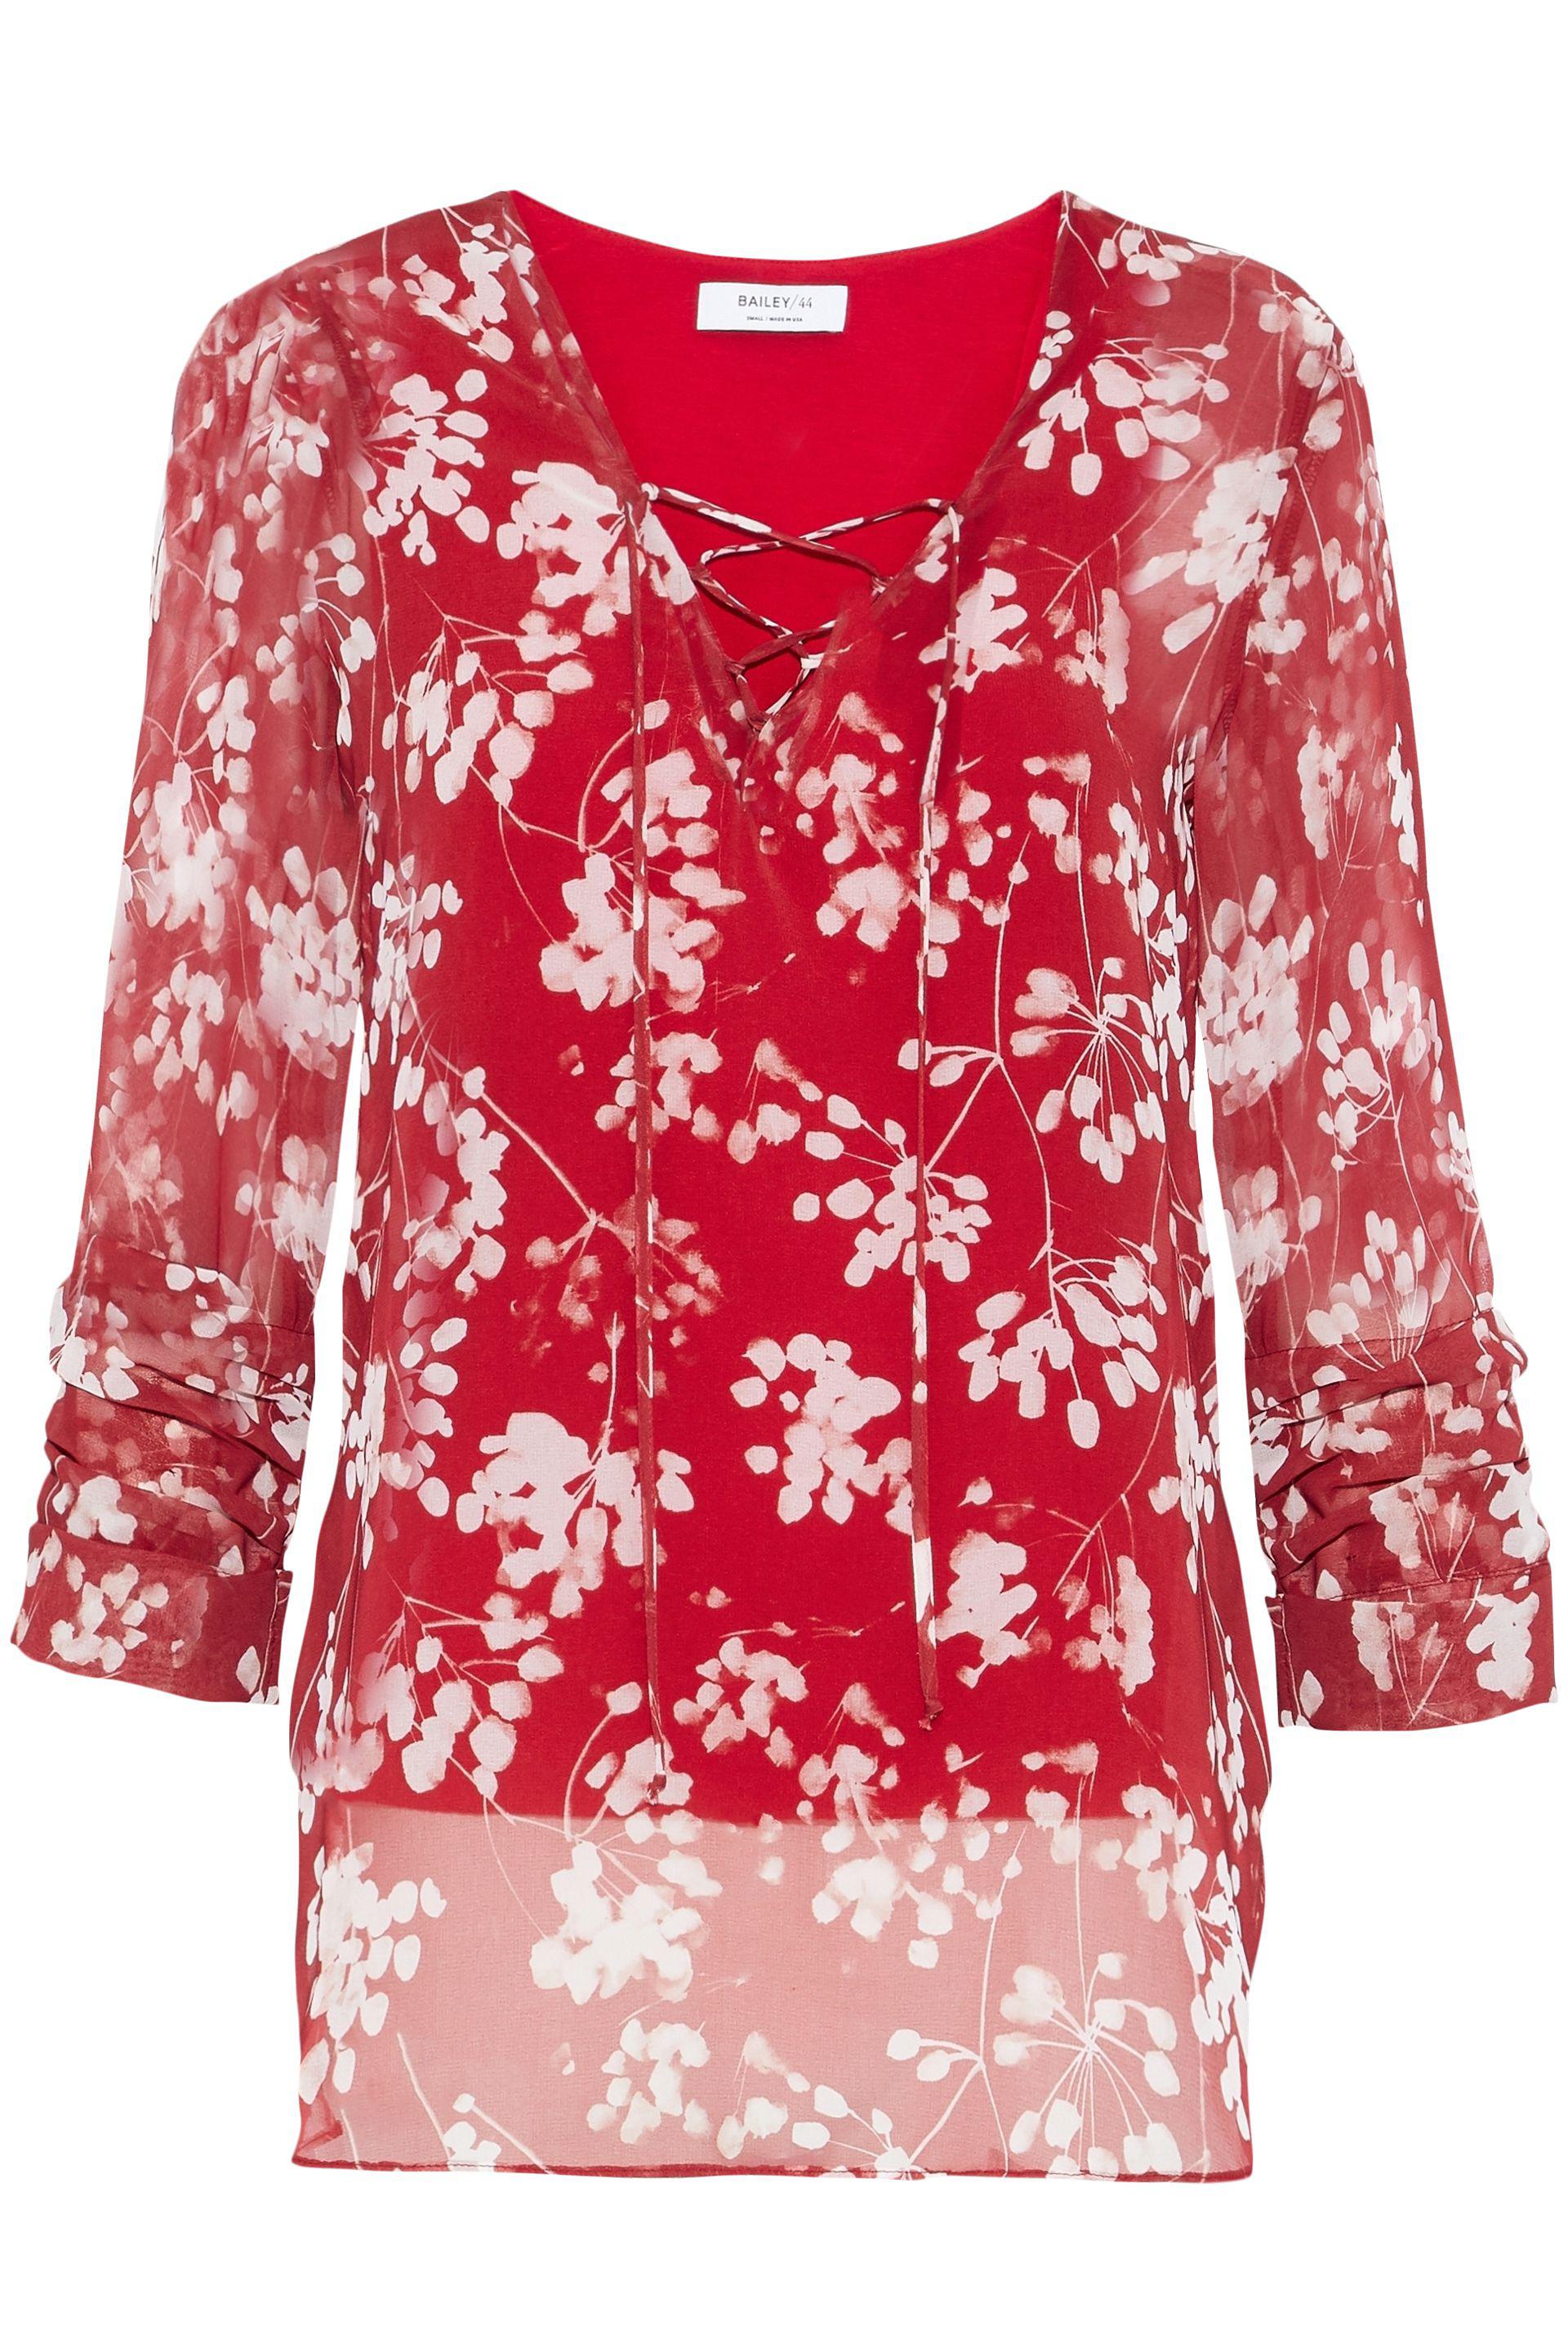 Lyst - Bailey 44 Cherry Blossom Lace-up Floral-print Chiffon Blouse in Red